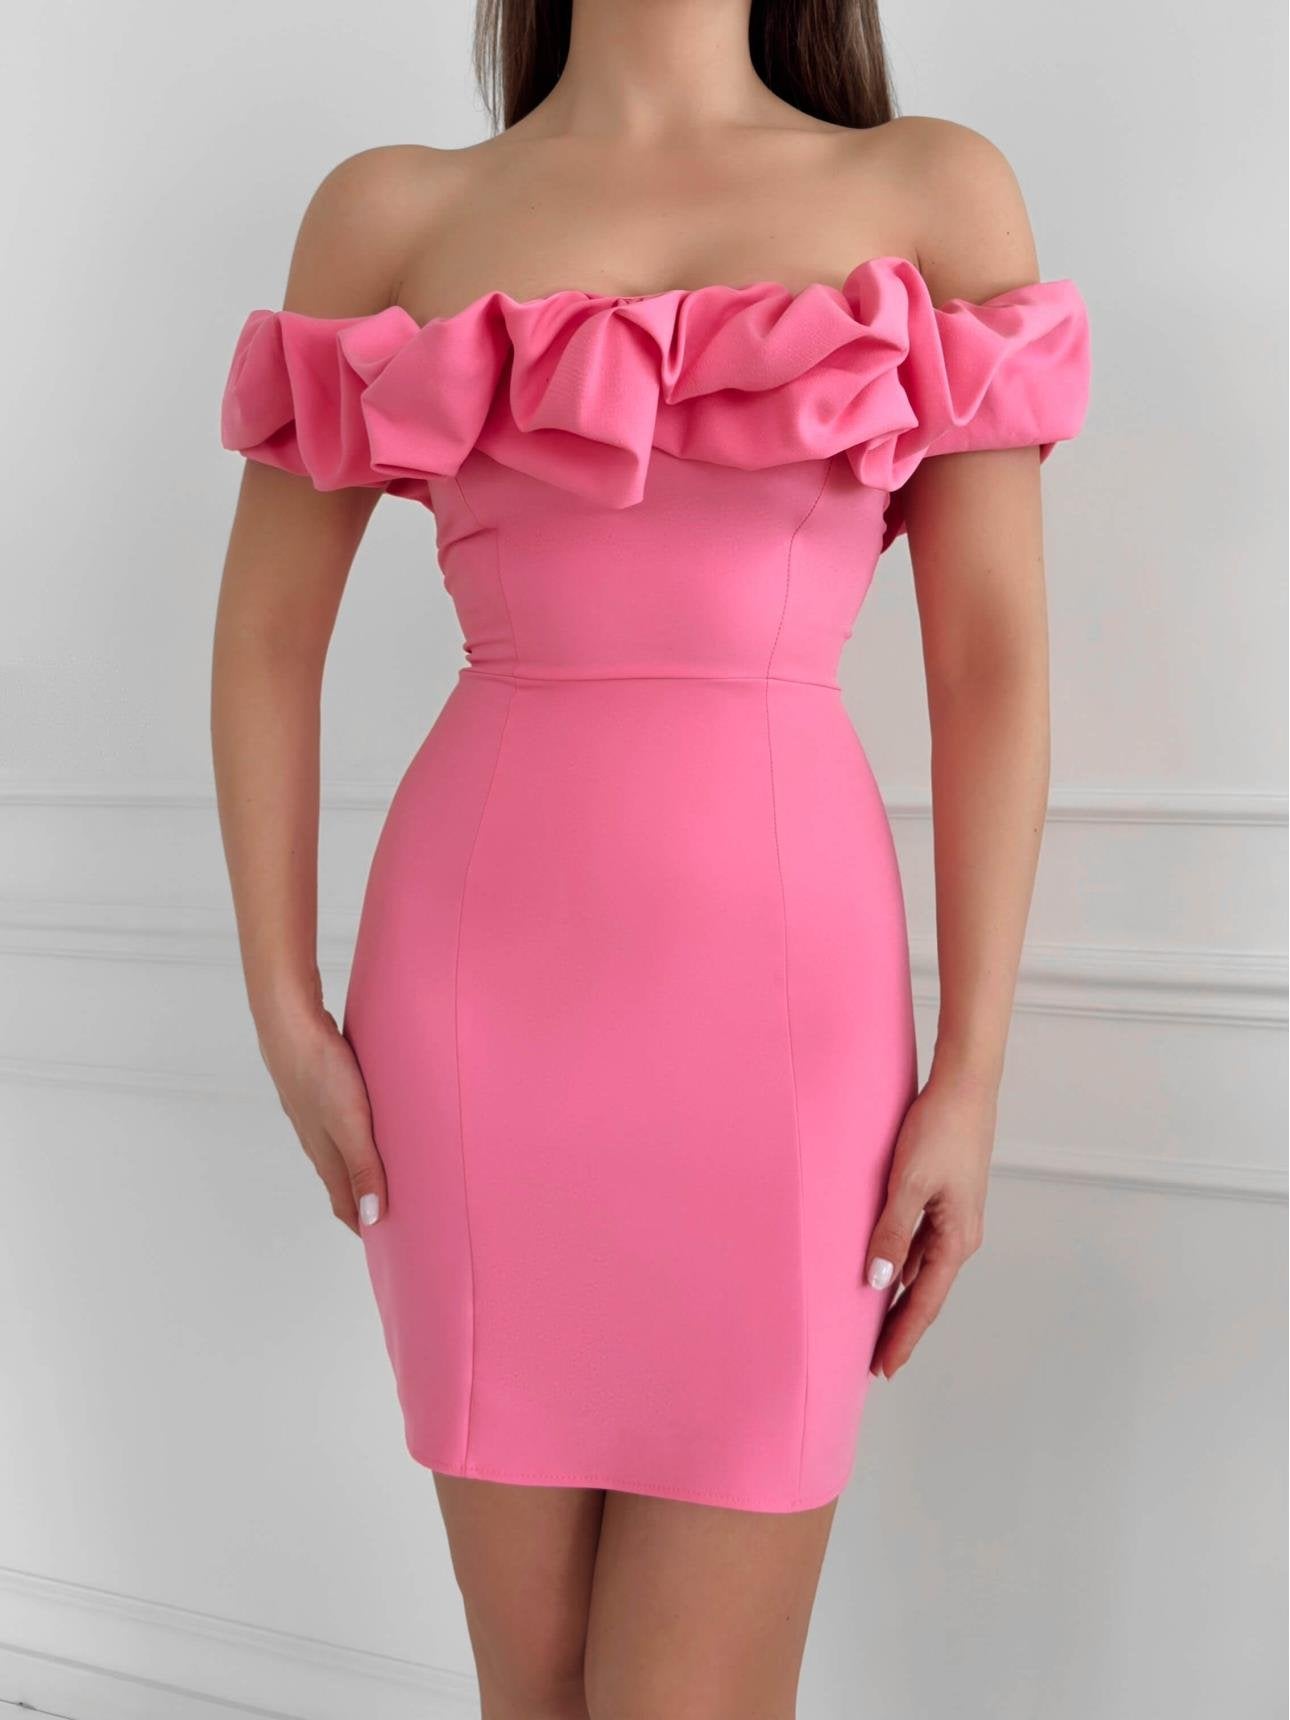 PINK COLLAR FRILLY FITTED MINI DRESS - Lebbse